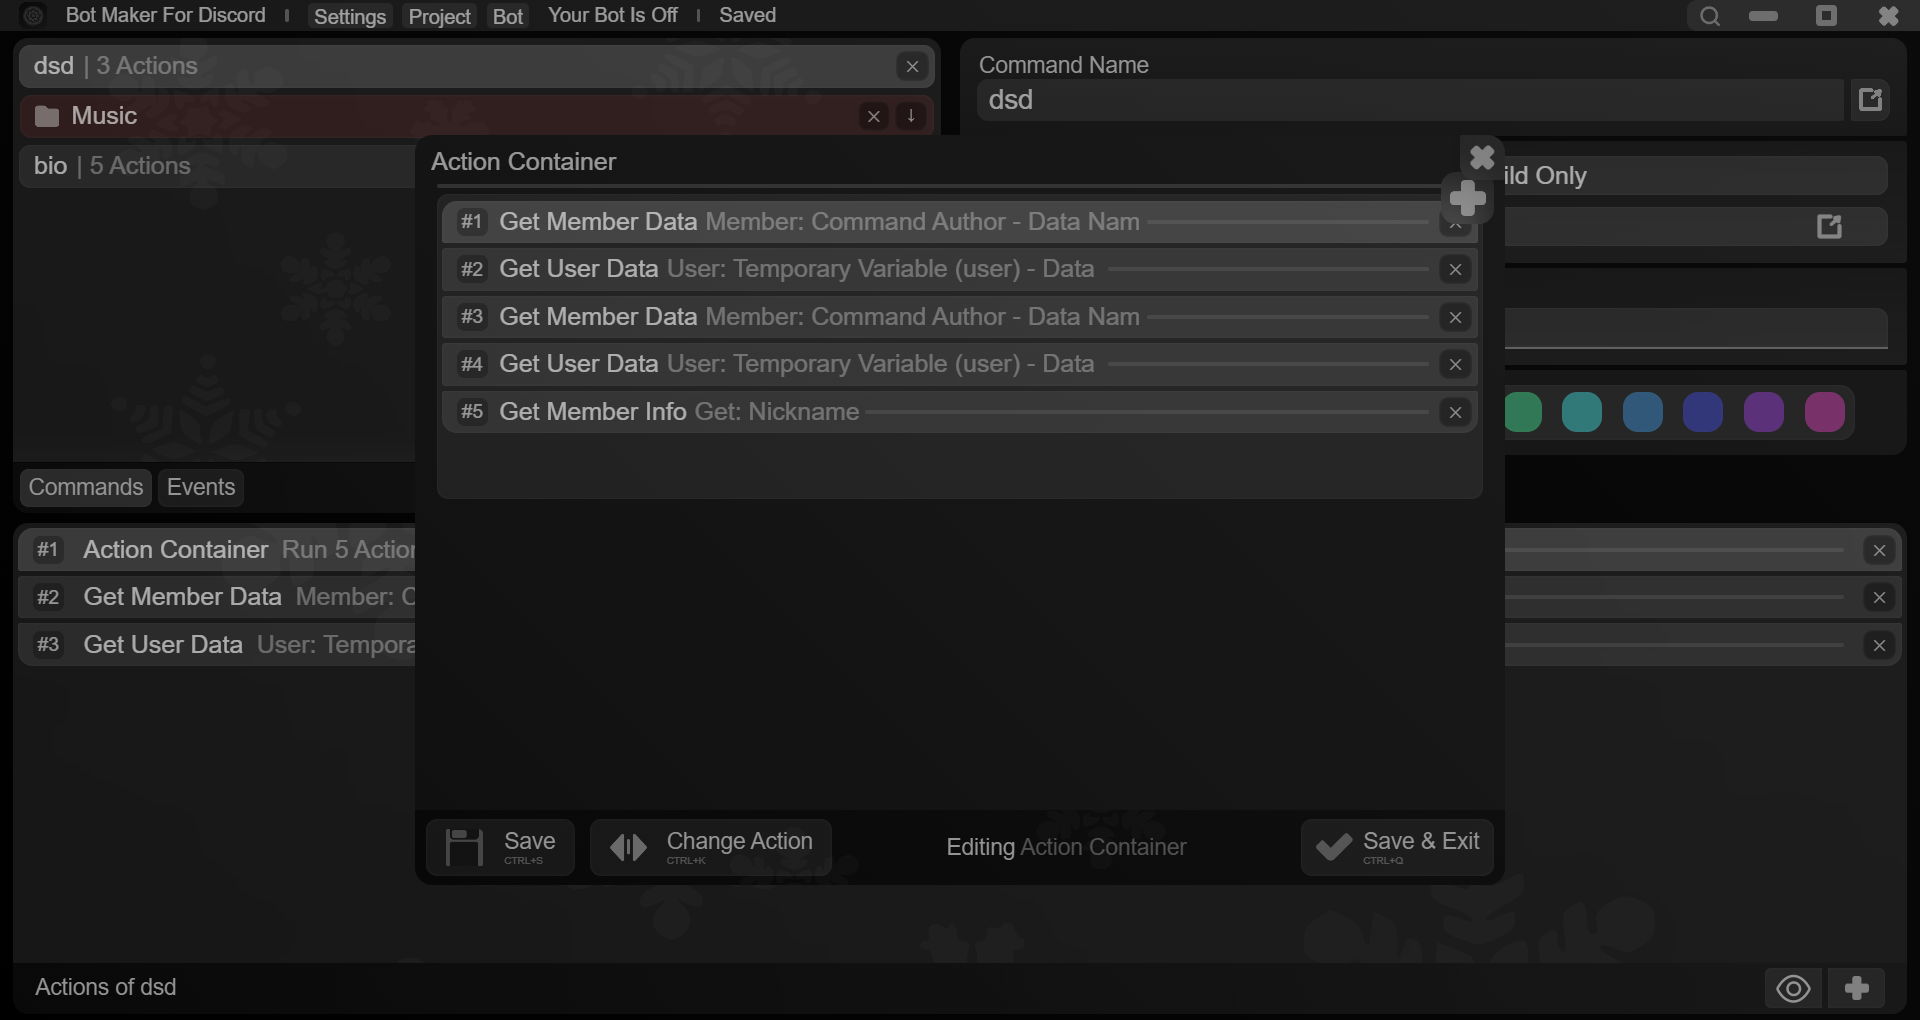 SteamDB makes it easier to track upcoming releases